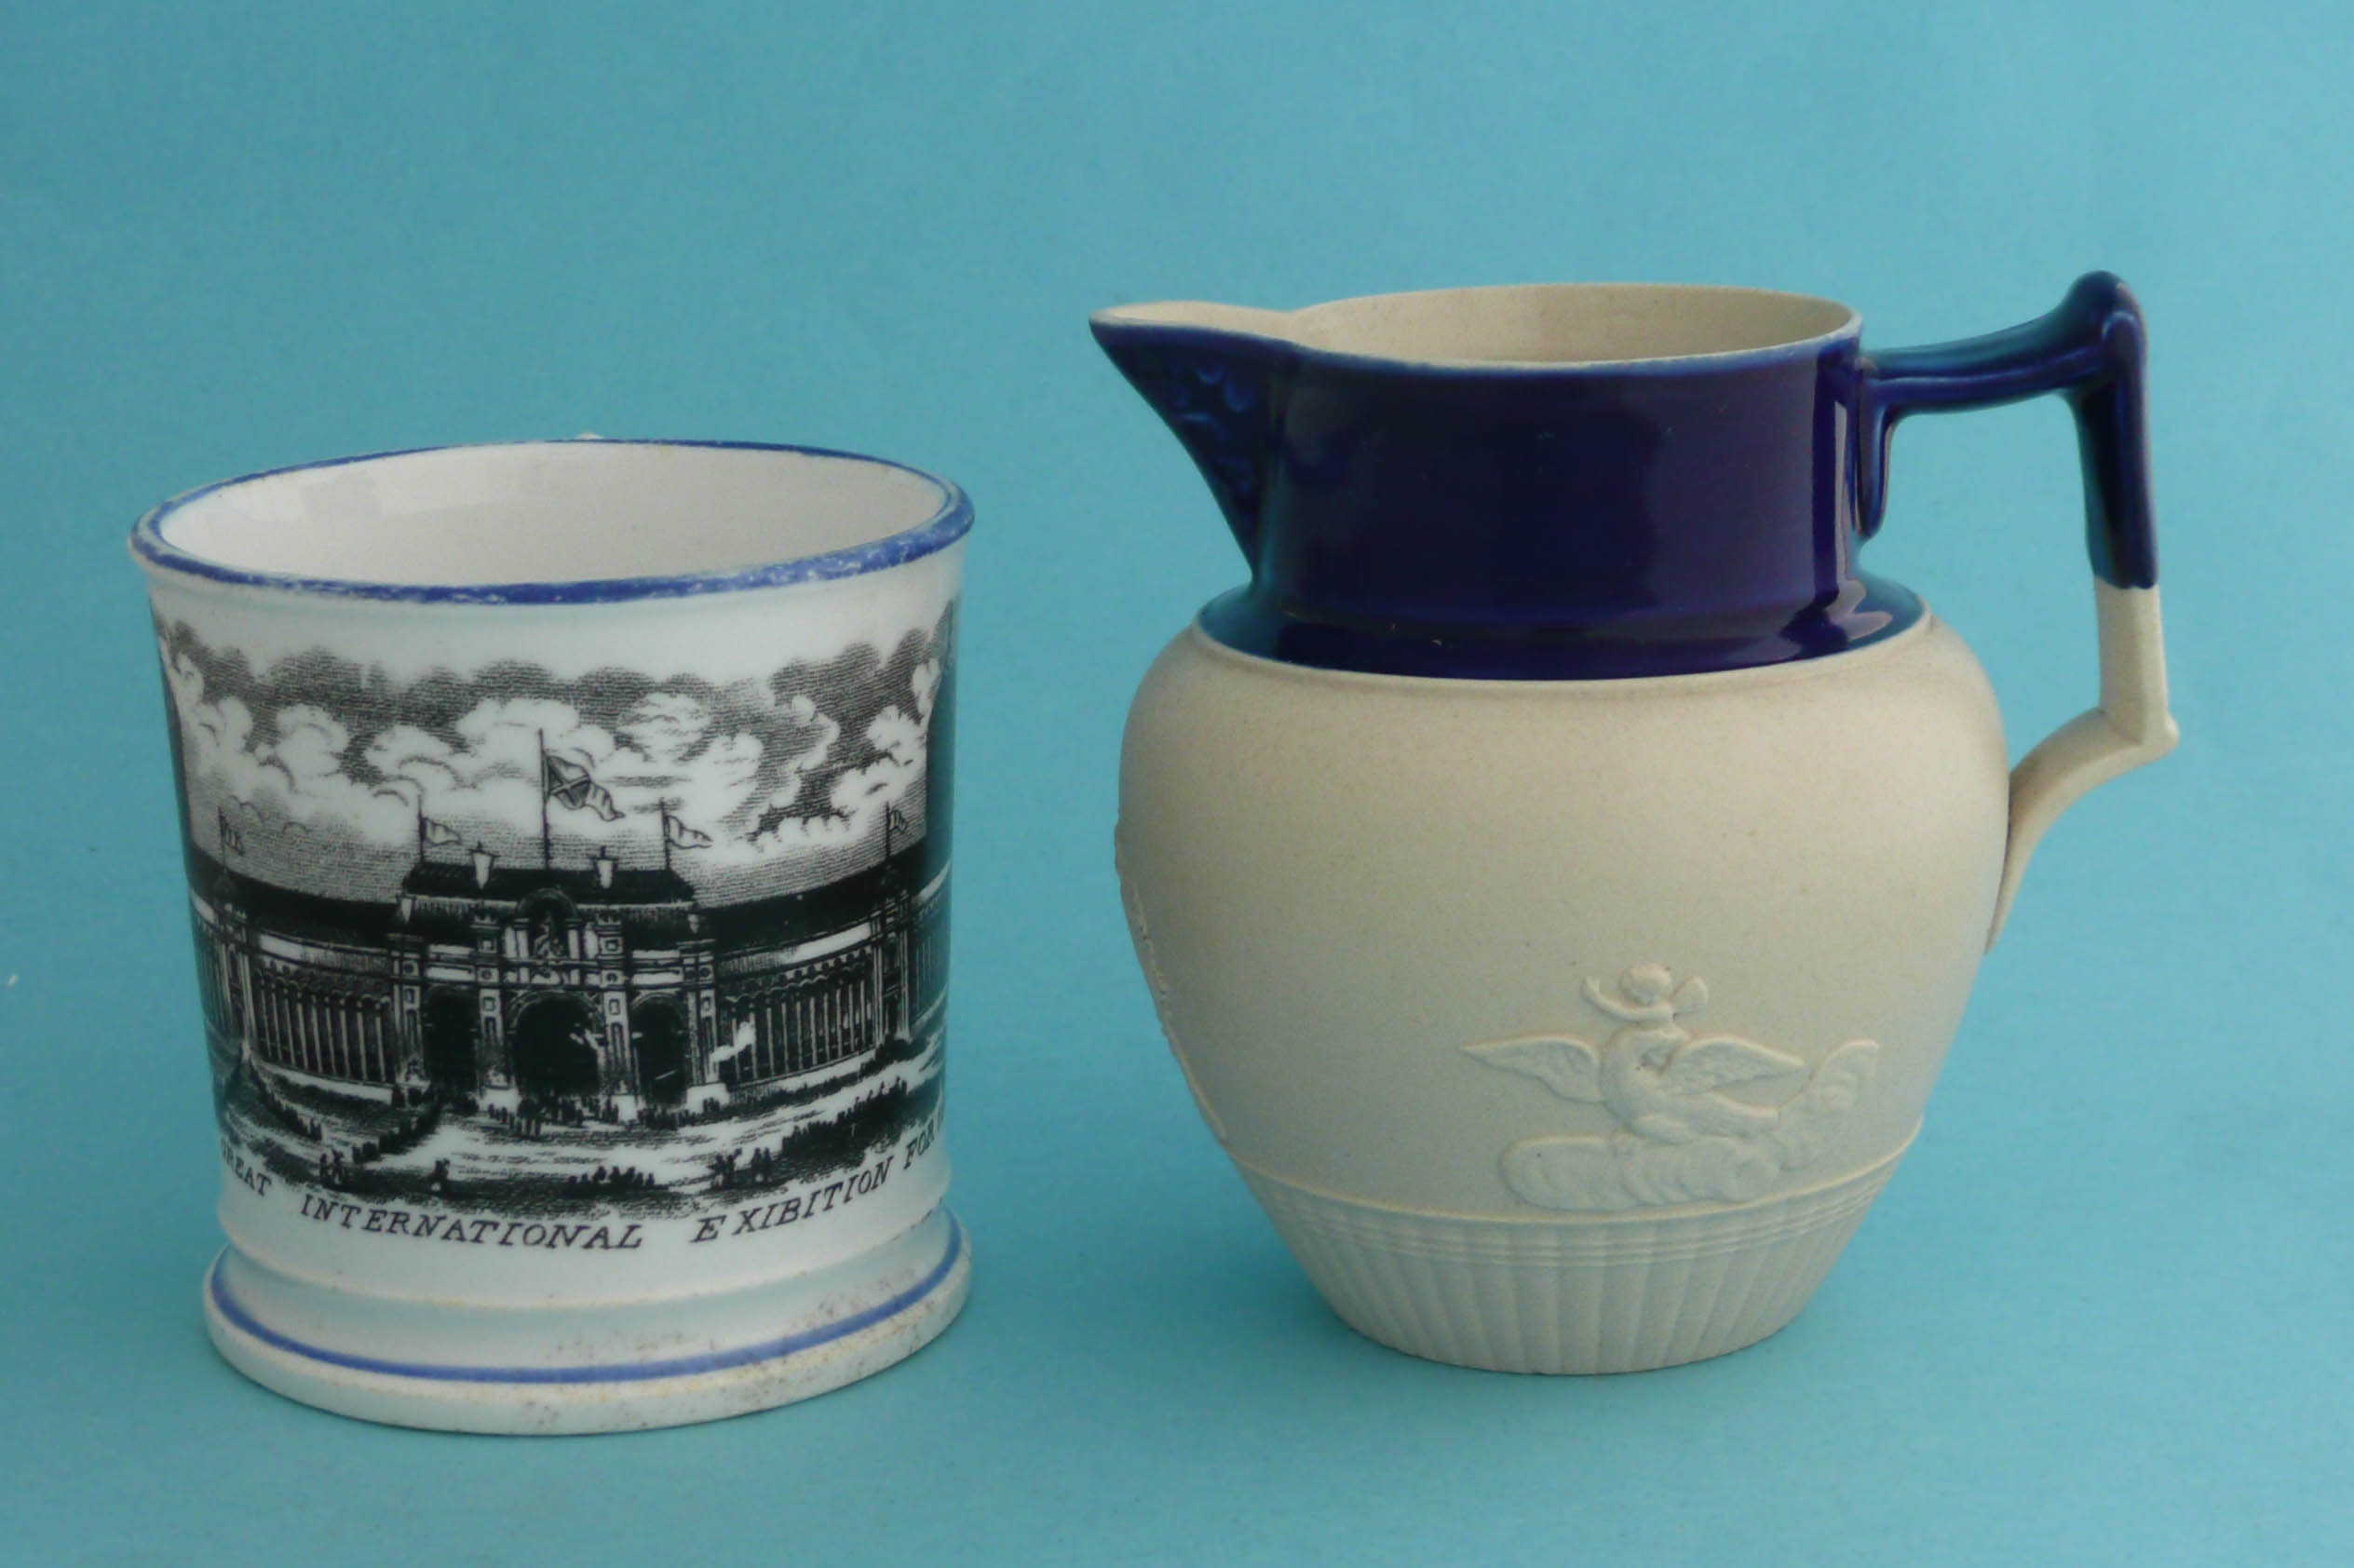 A mug printed in black with an inscribed view of 1862 International Exhibition and a small white